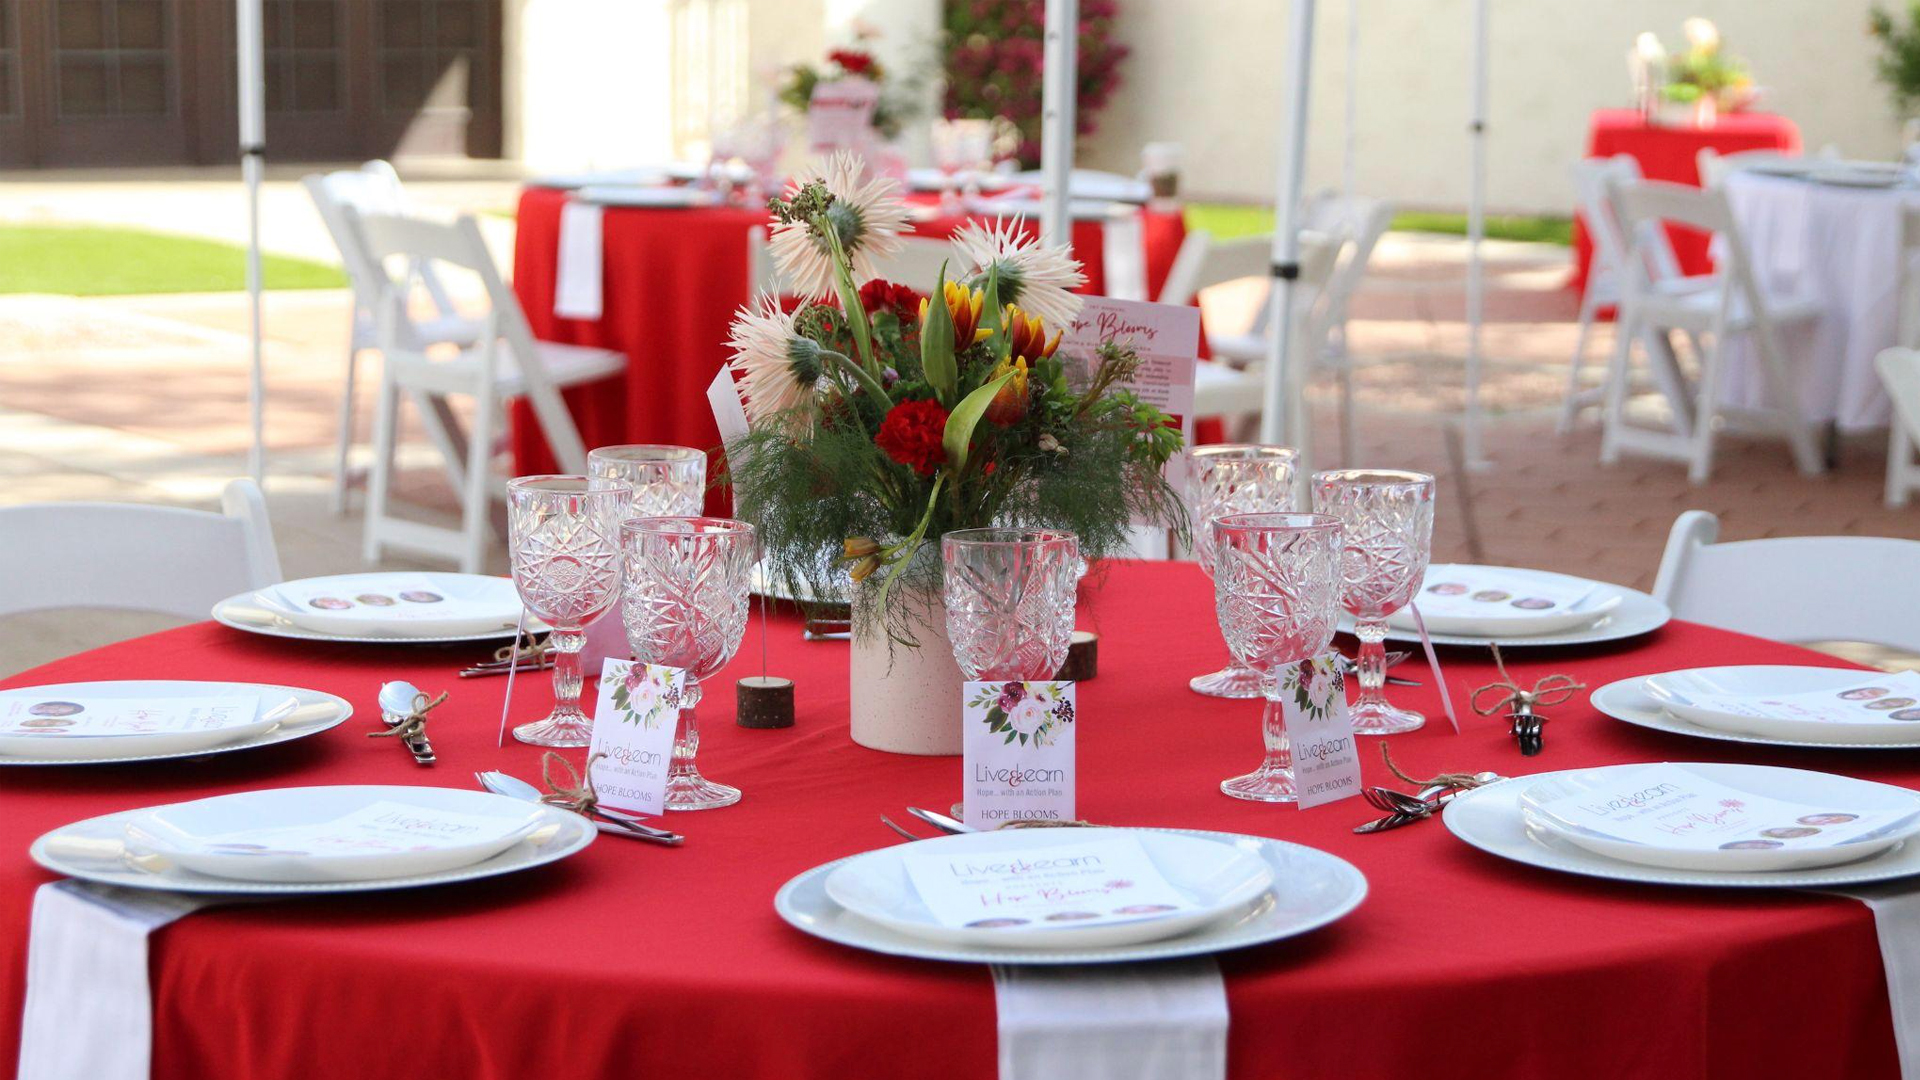 Live & Learn’s beautiful courtyard was transformed into a location for a lovely spring brunch.